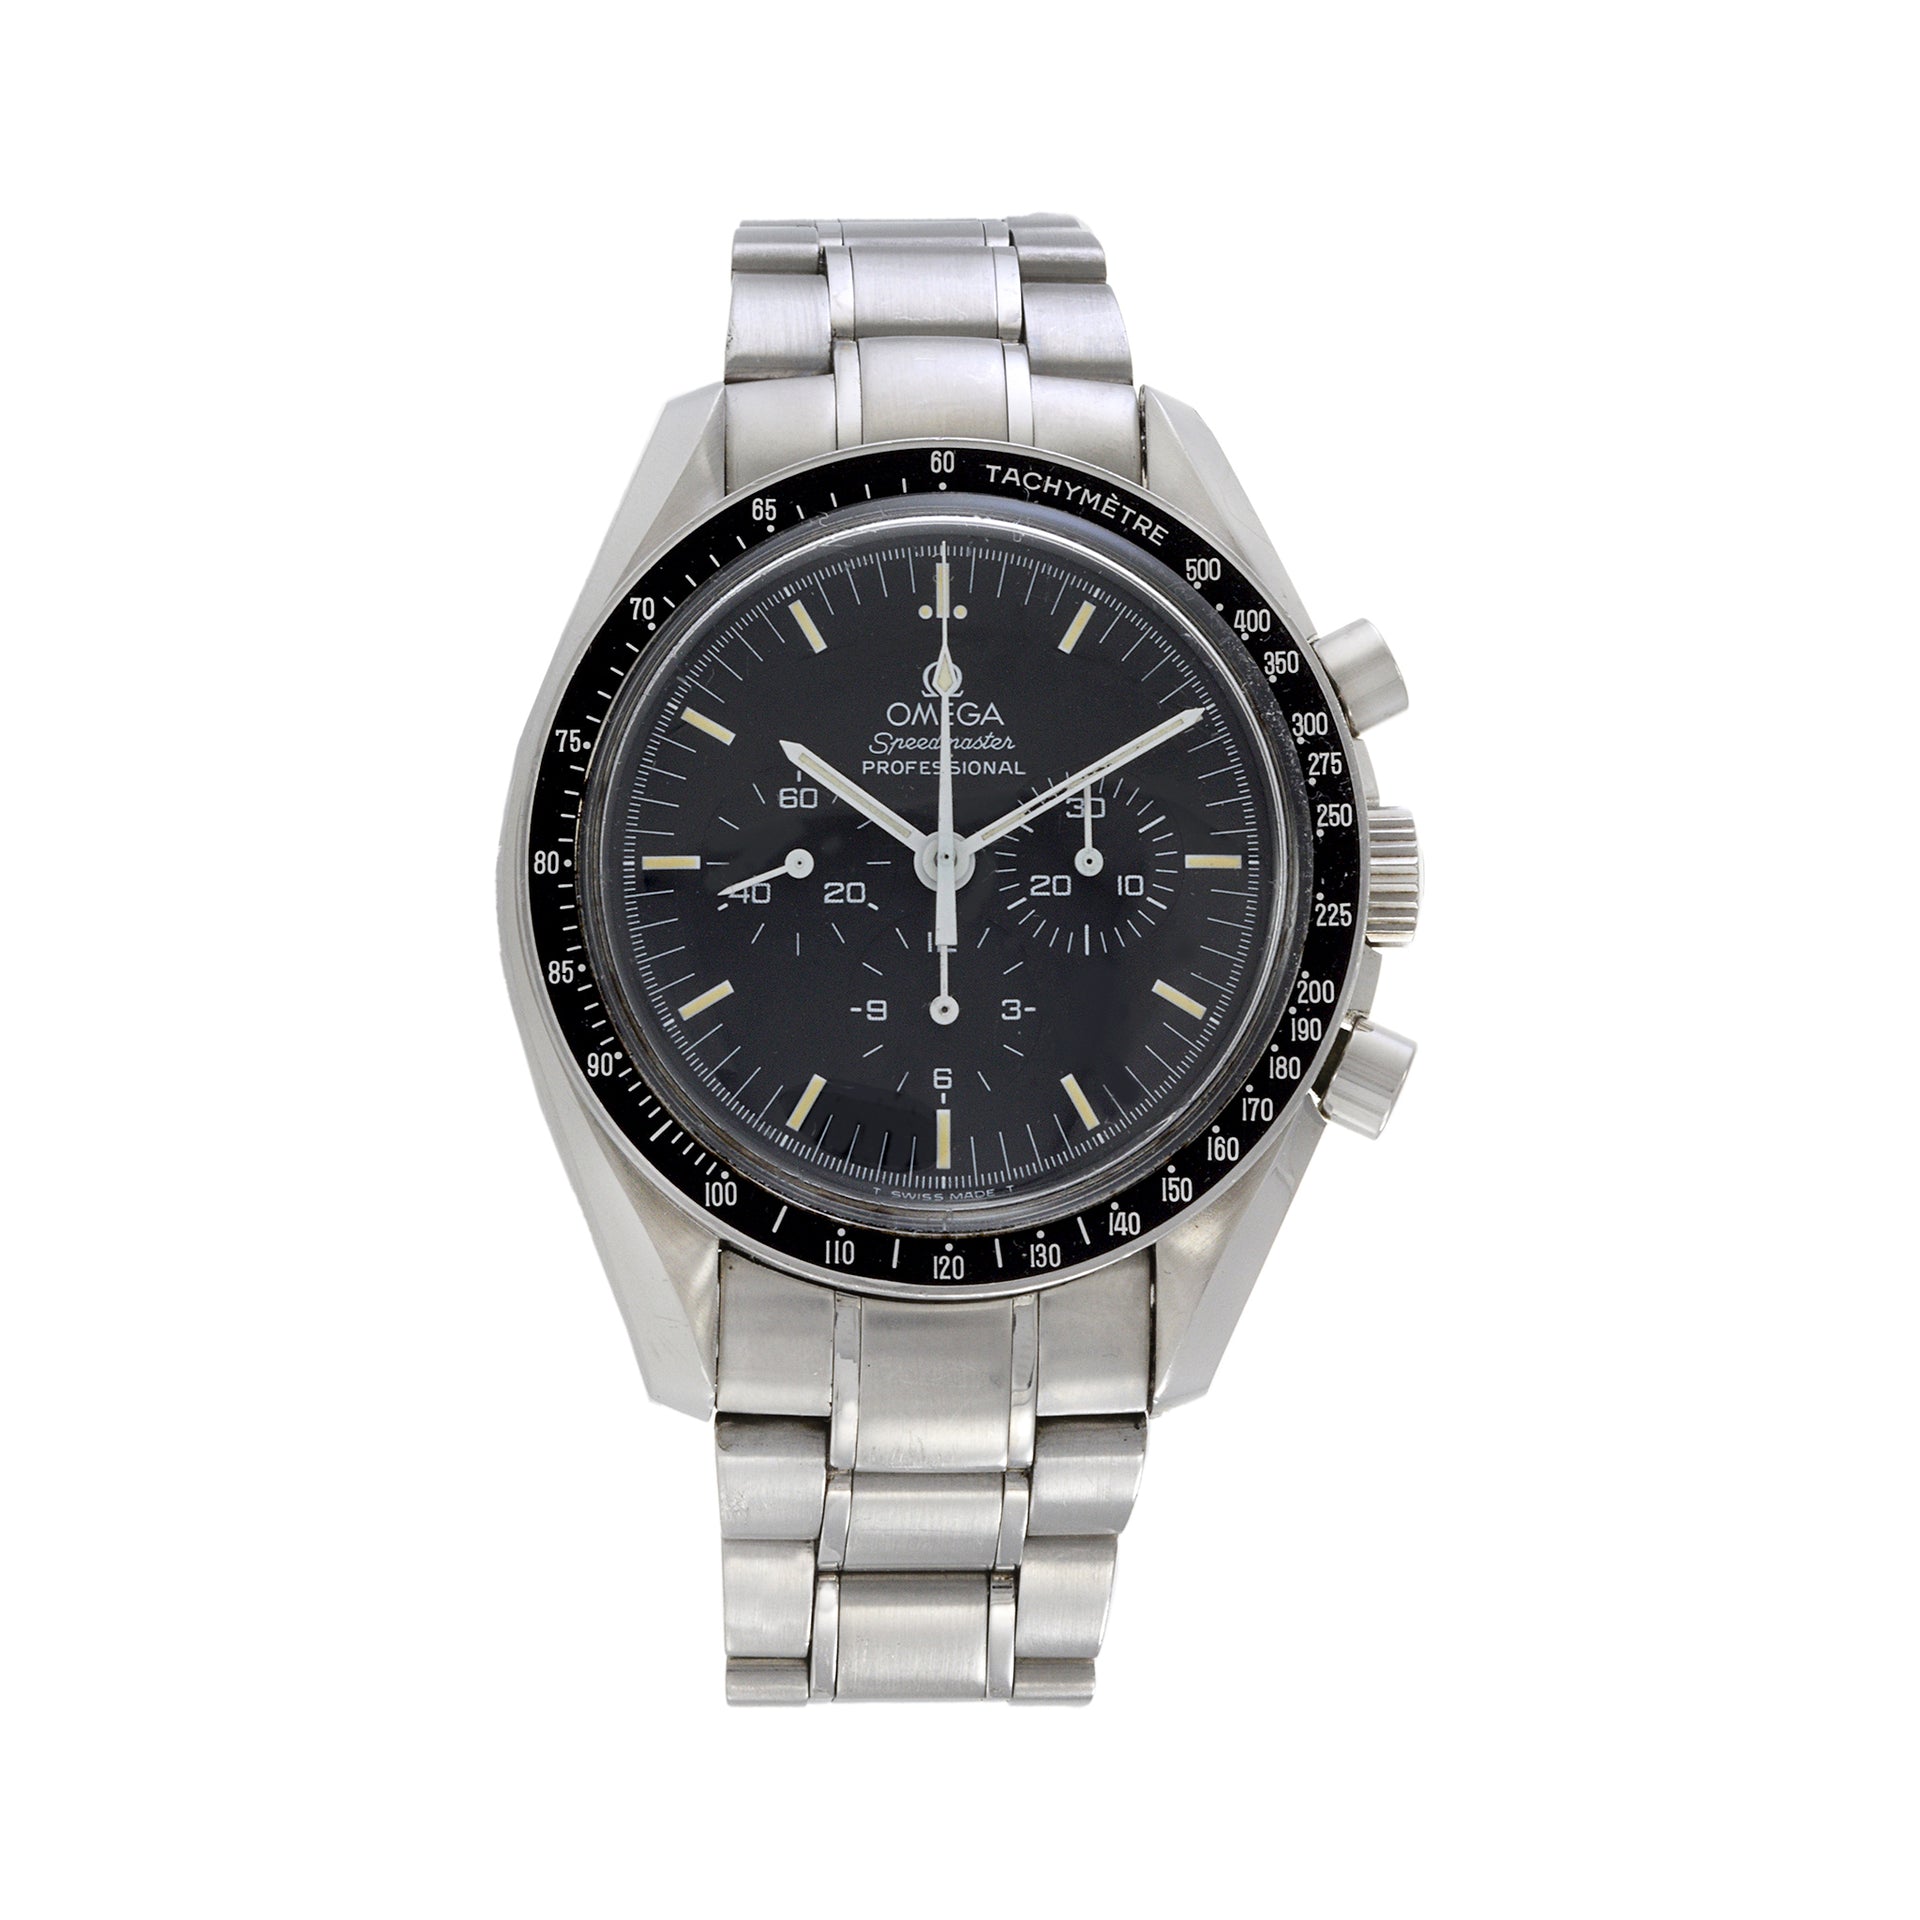 Omega Speedmaster Moon Watch Reference 145.0022 1985 Manufacture